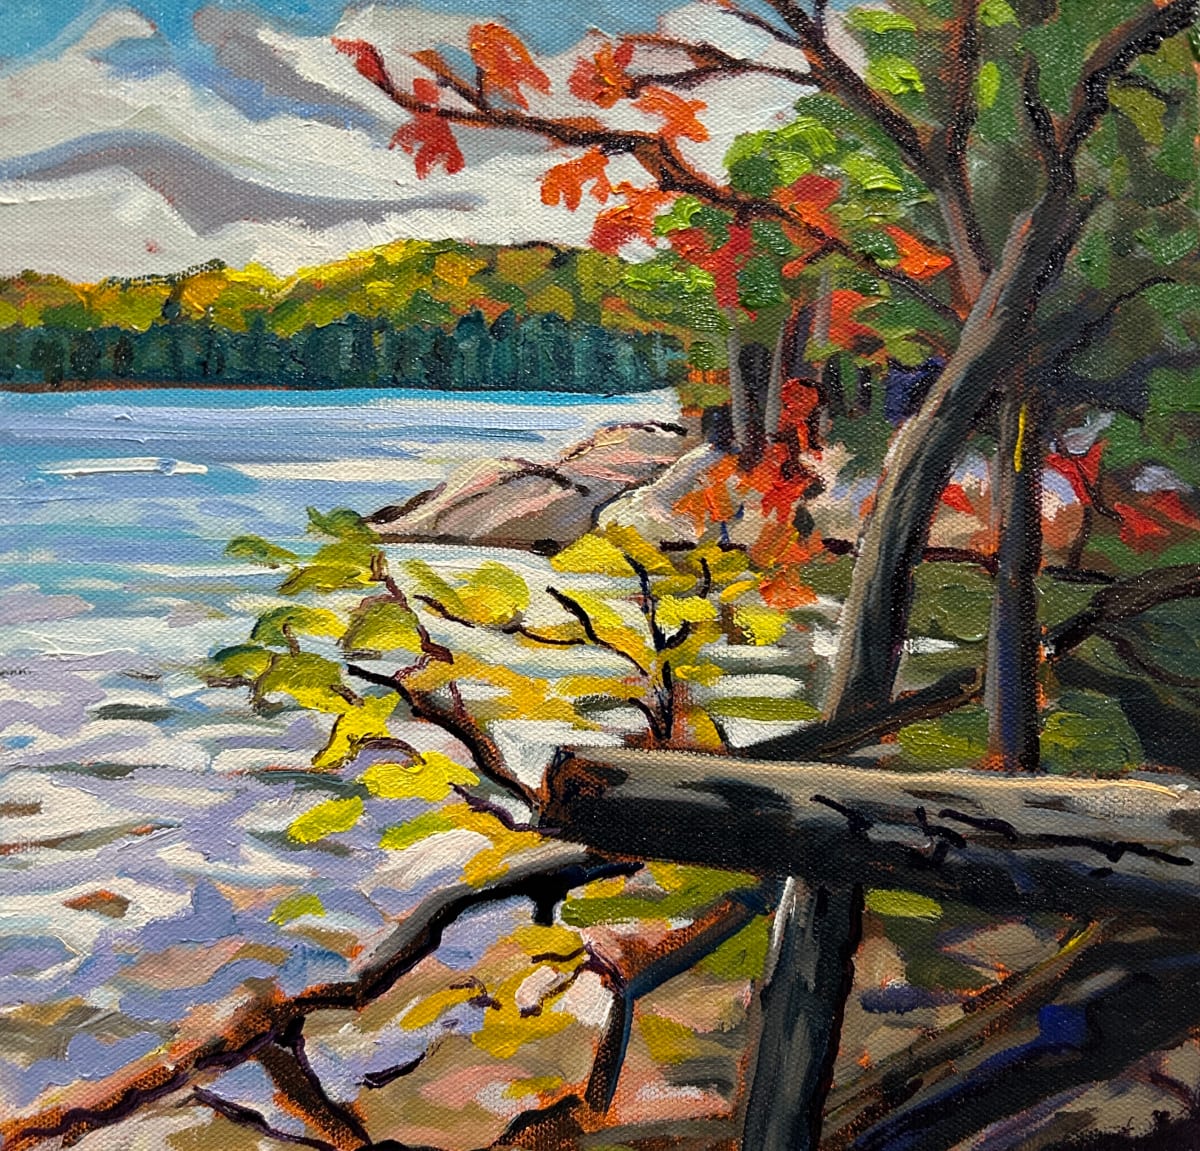 Changing weather, Silent Lake Provincial Park, by Lynne Ryall  Image: An en plein air piece done at Silent Lake Provincial Park where the weather kept changing